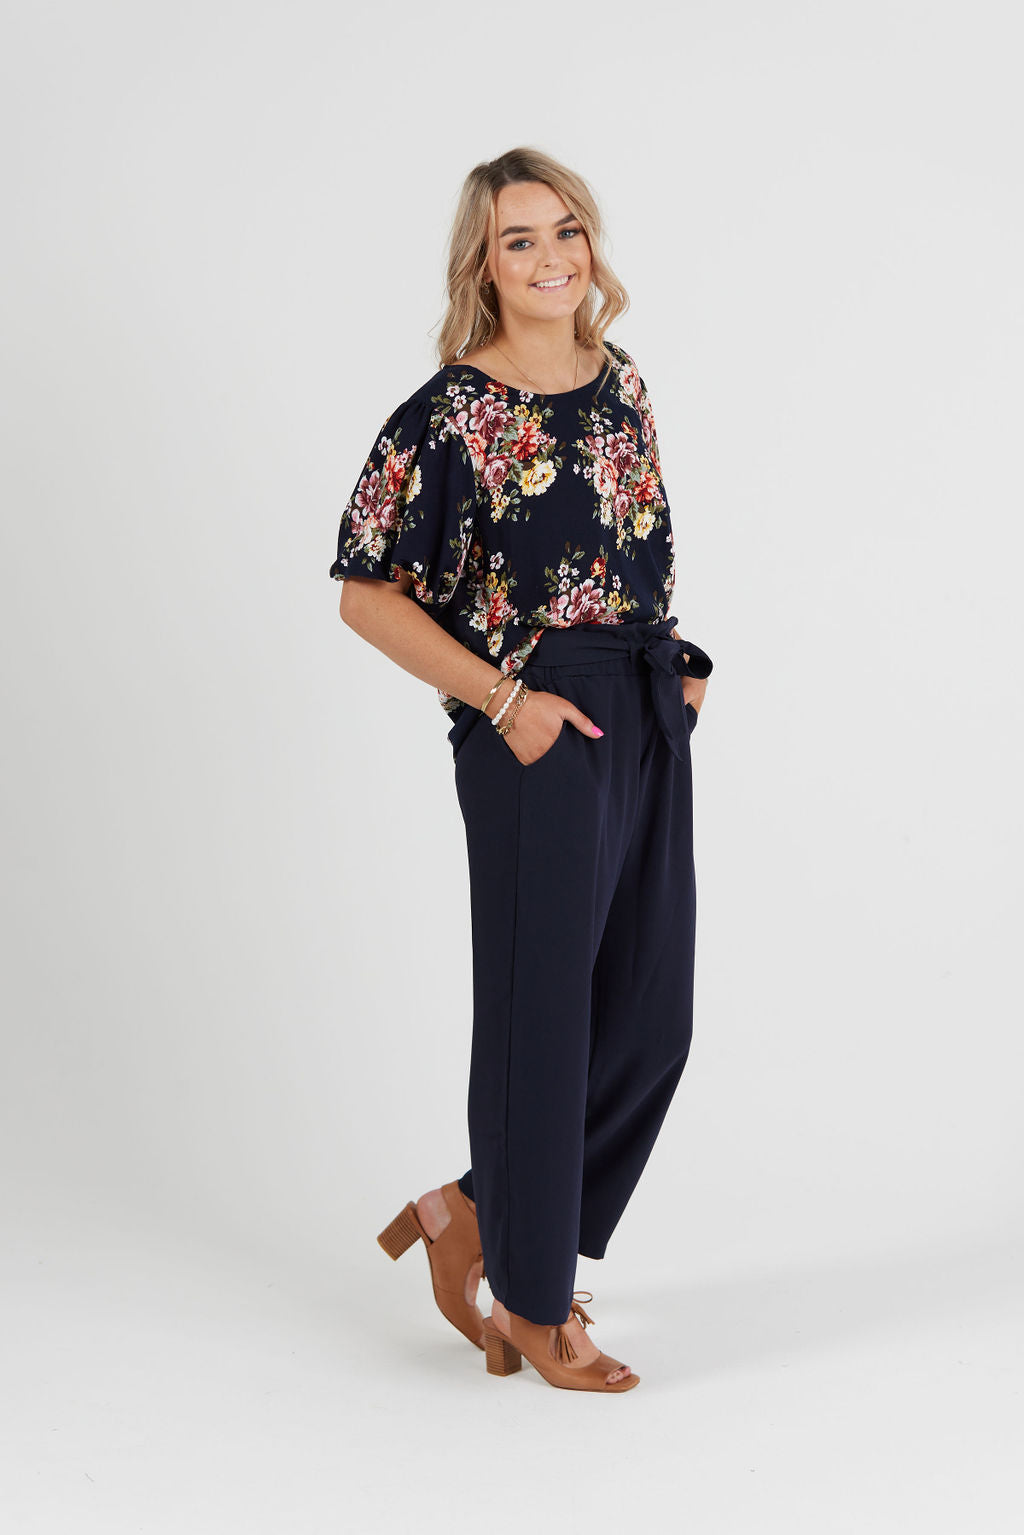 Peony Top Navy Floral